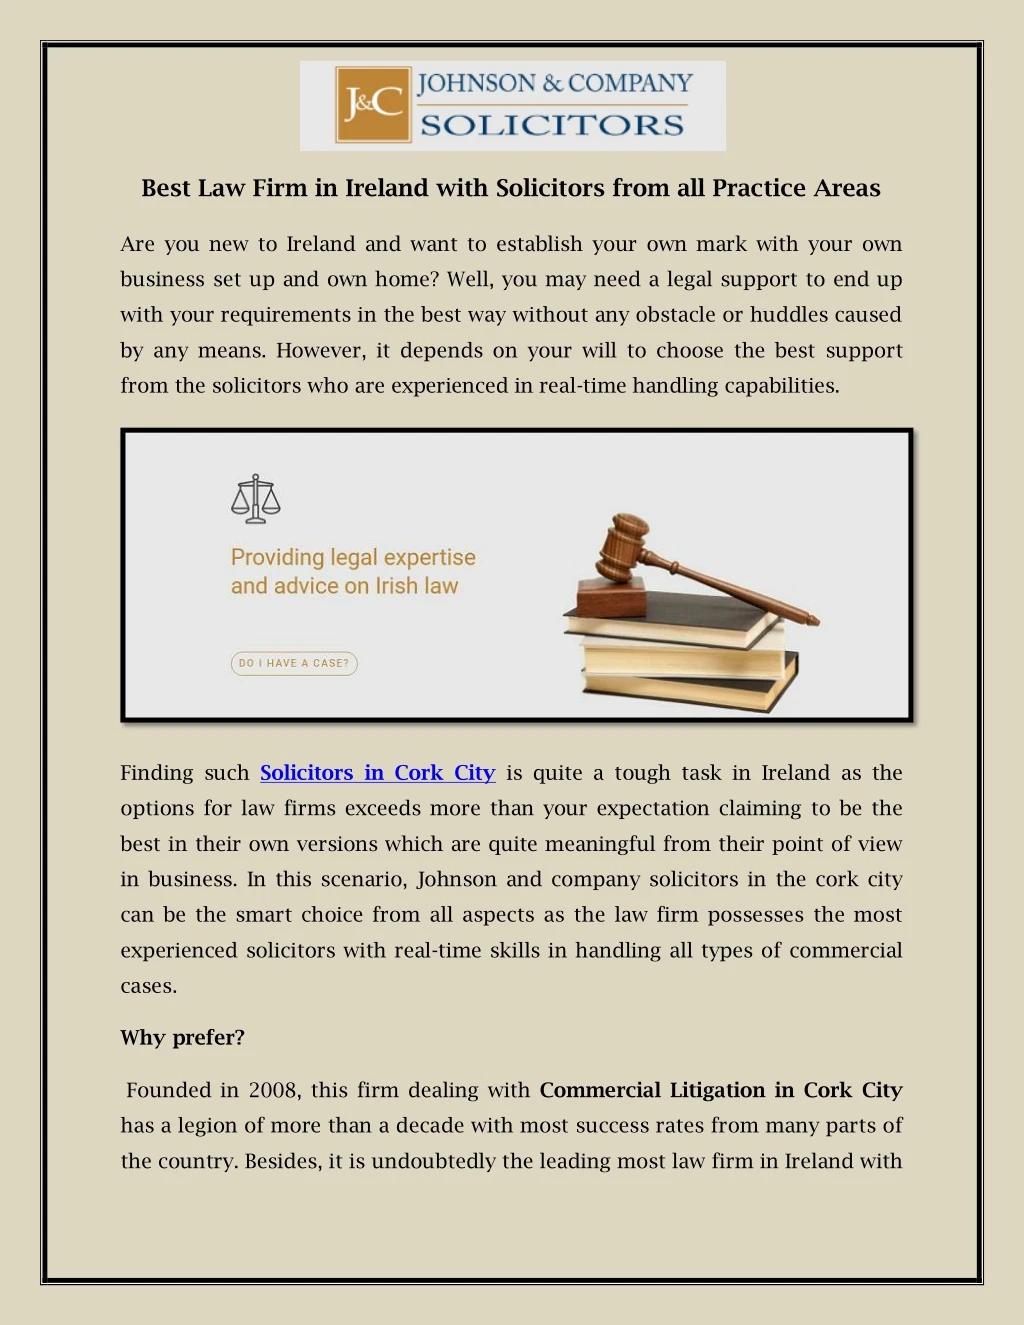 best law firm in ireland with solicitors from